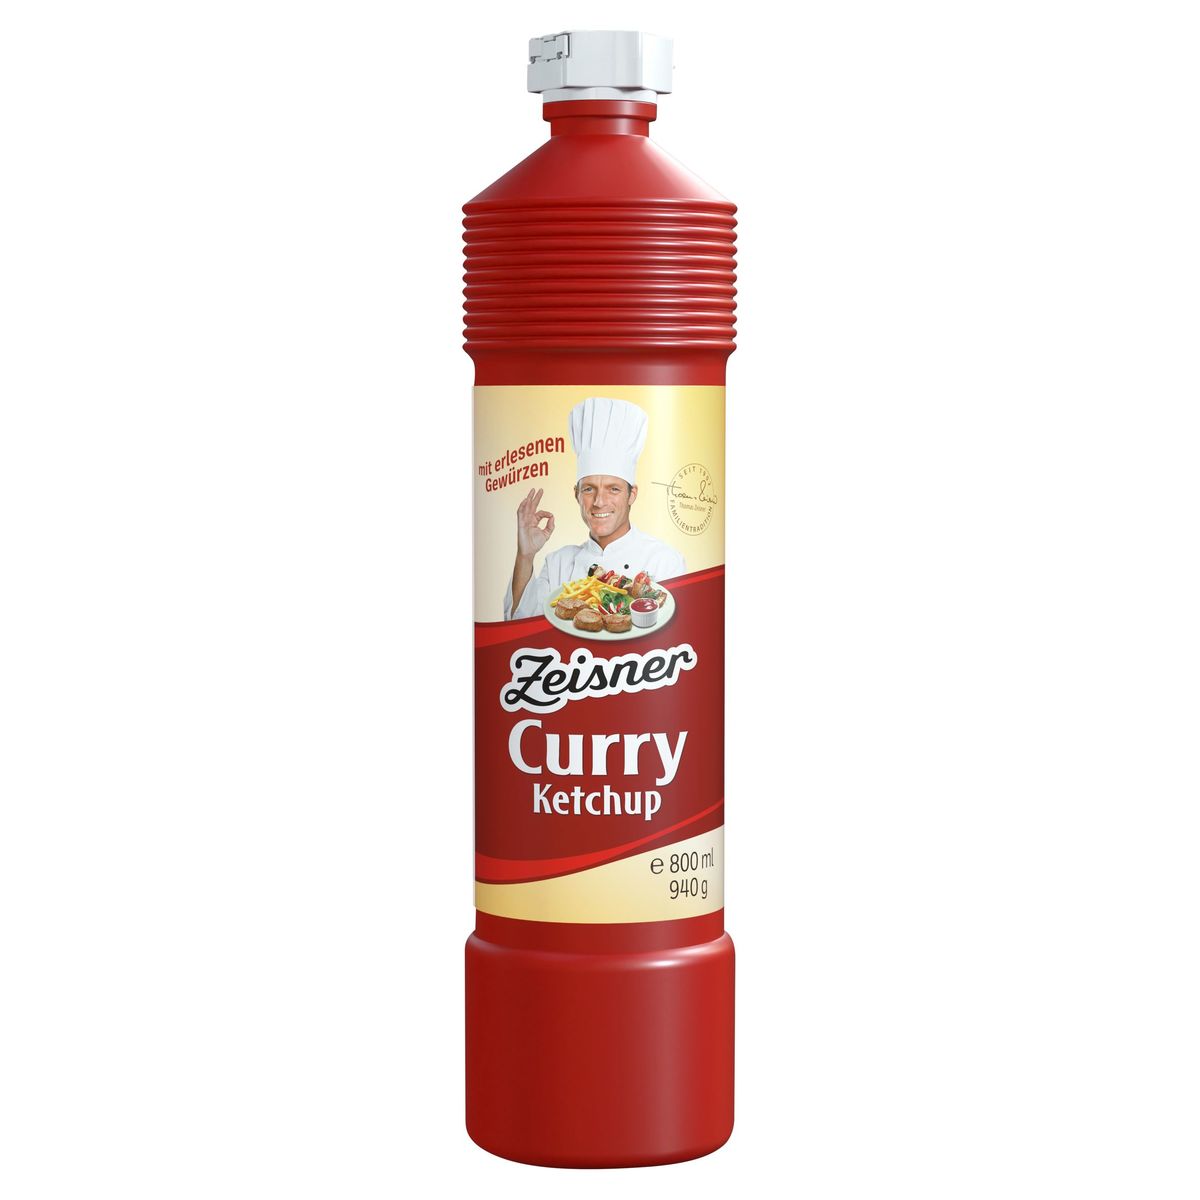 Zeisner Curry Ketchup 800 ml